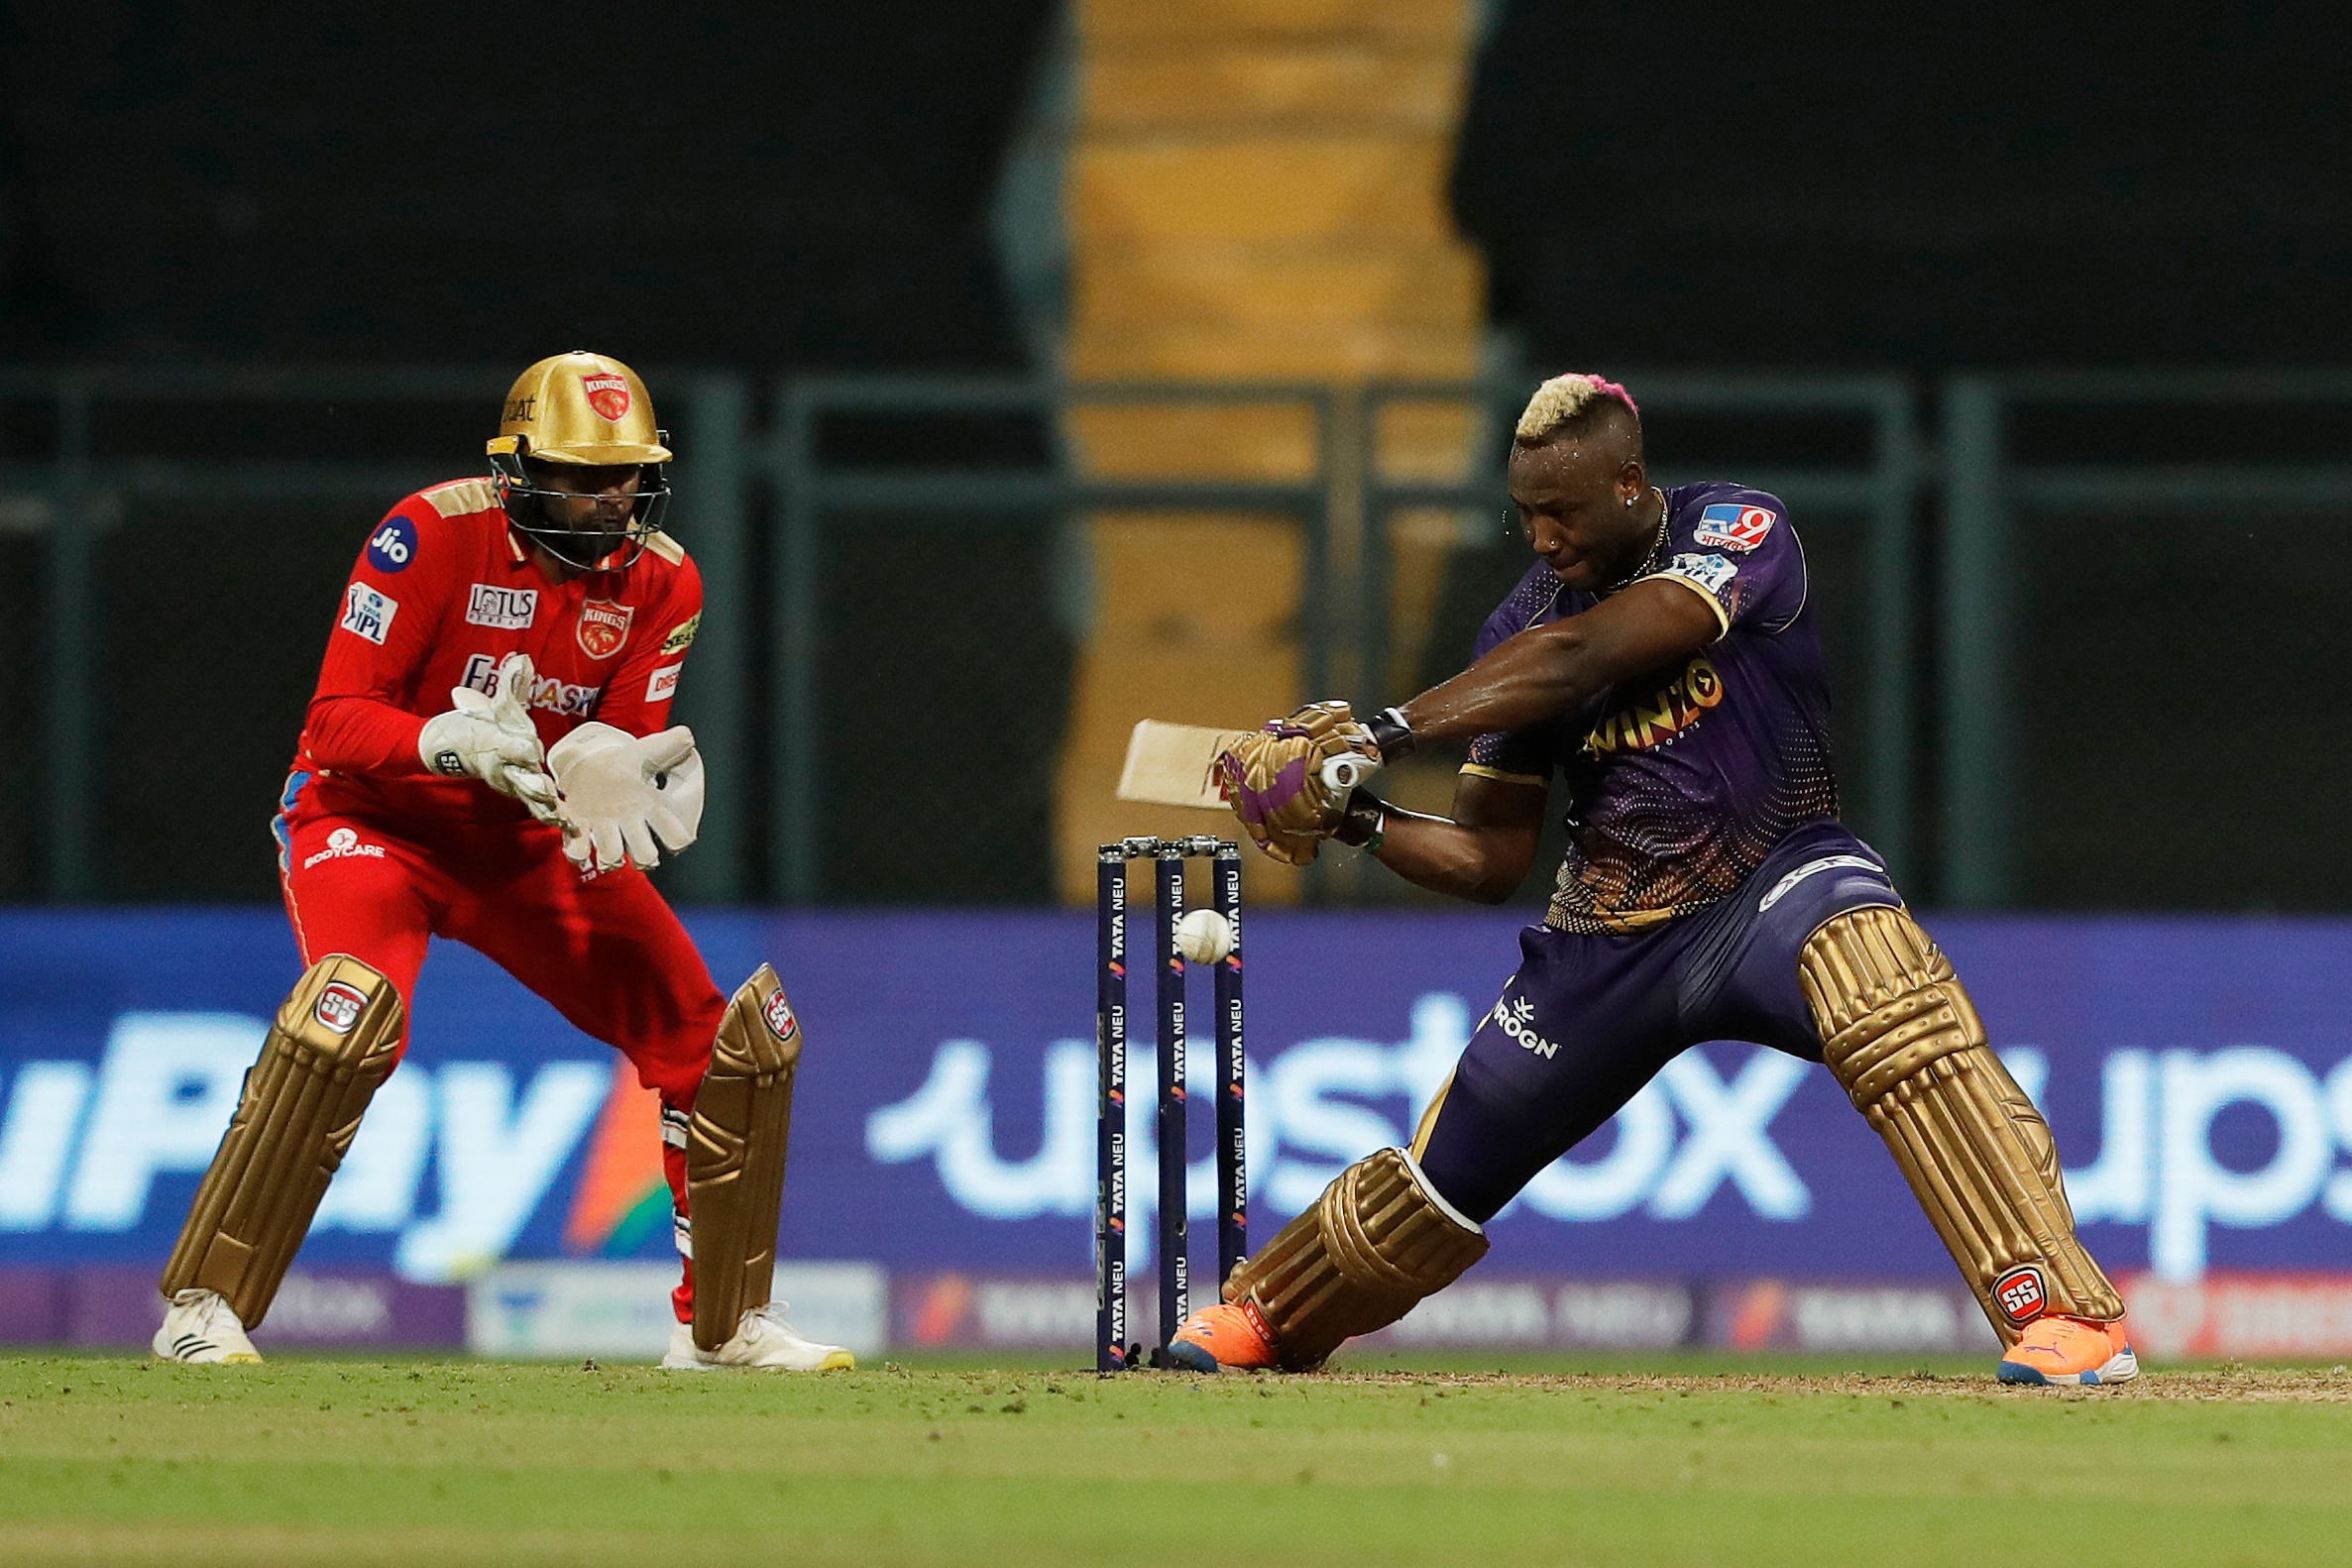 IPL 2022: Andre Russell holds record for most sixes in ongoing season